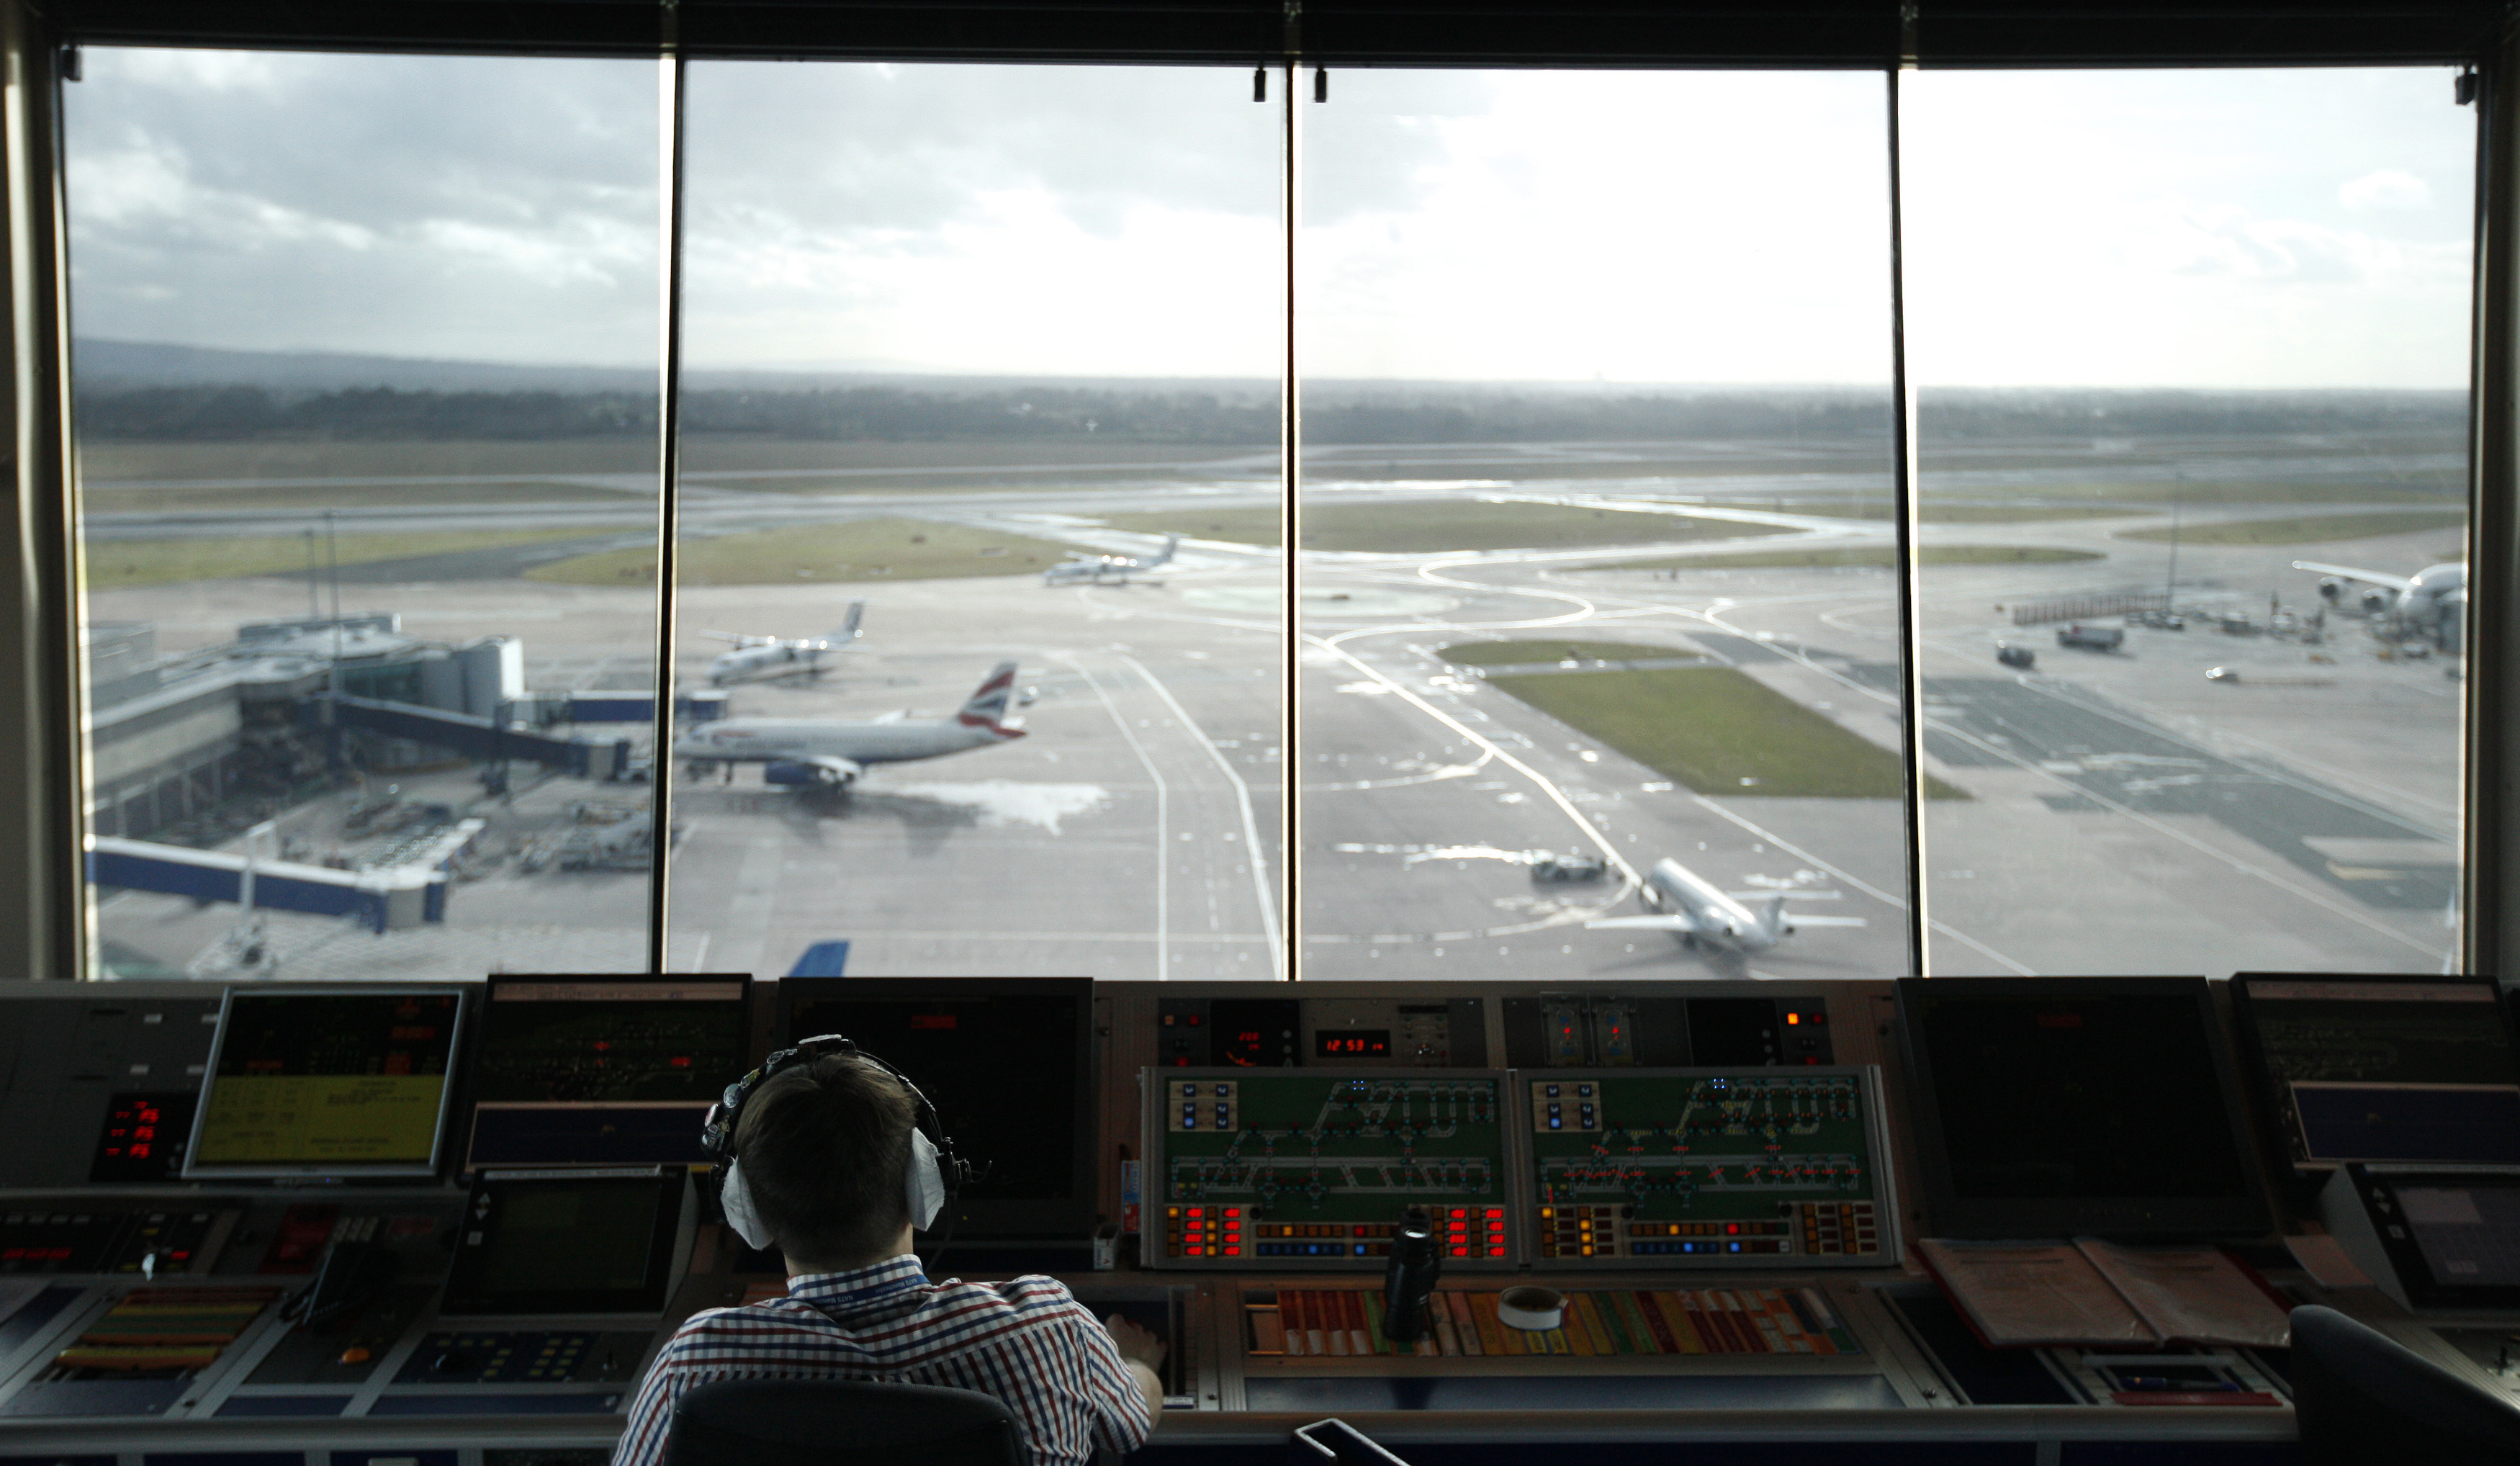 An air traffic controller monitors aircraft movement from the control tower at Manchester Airport